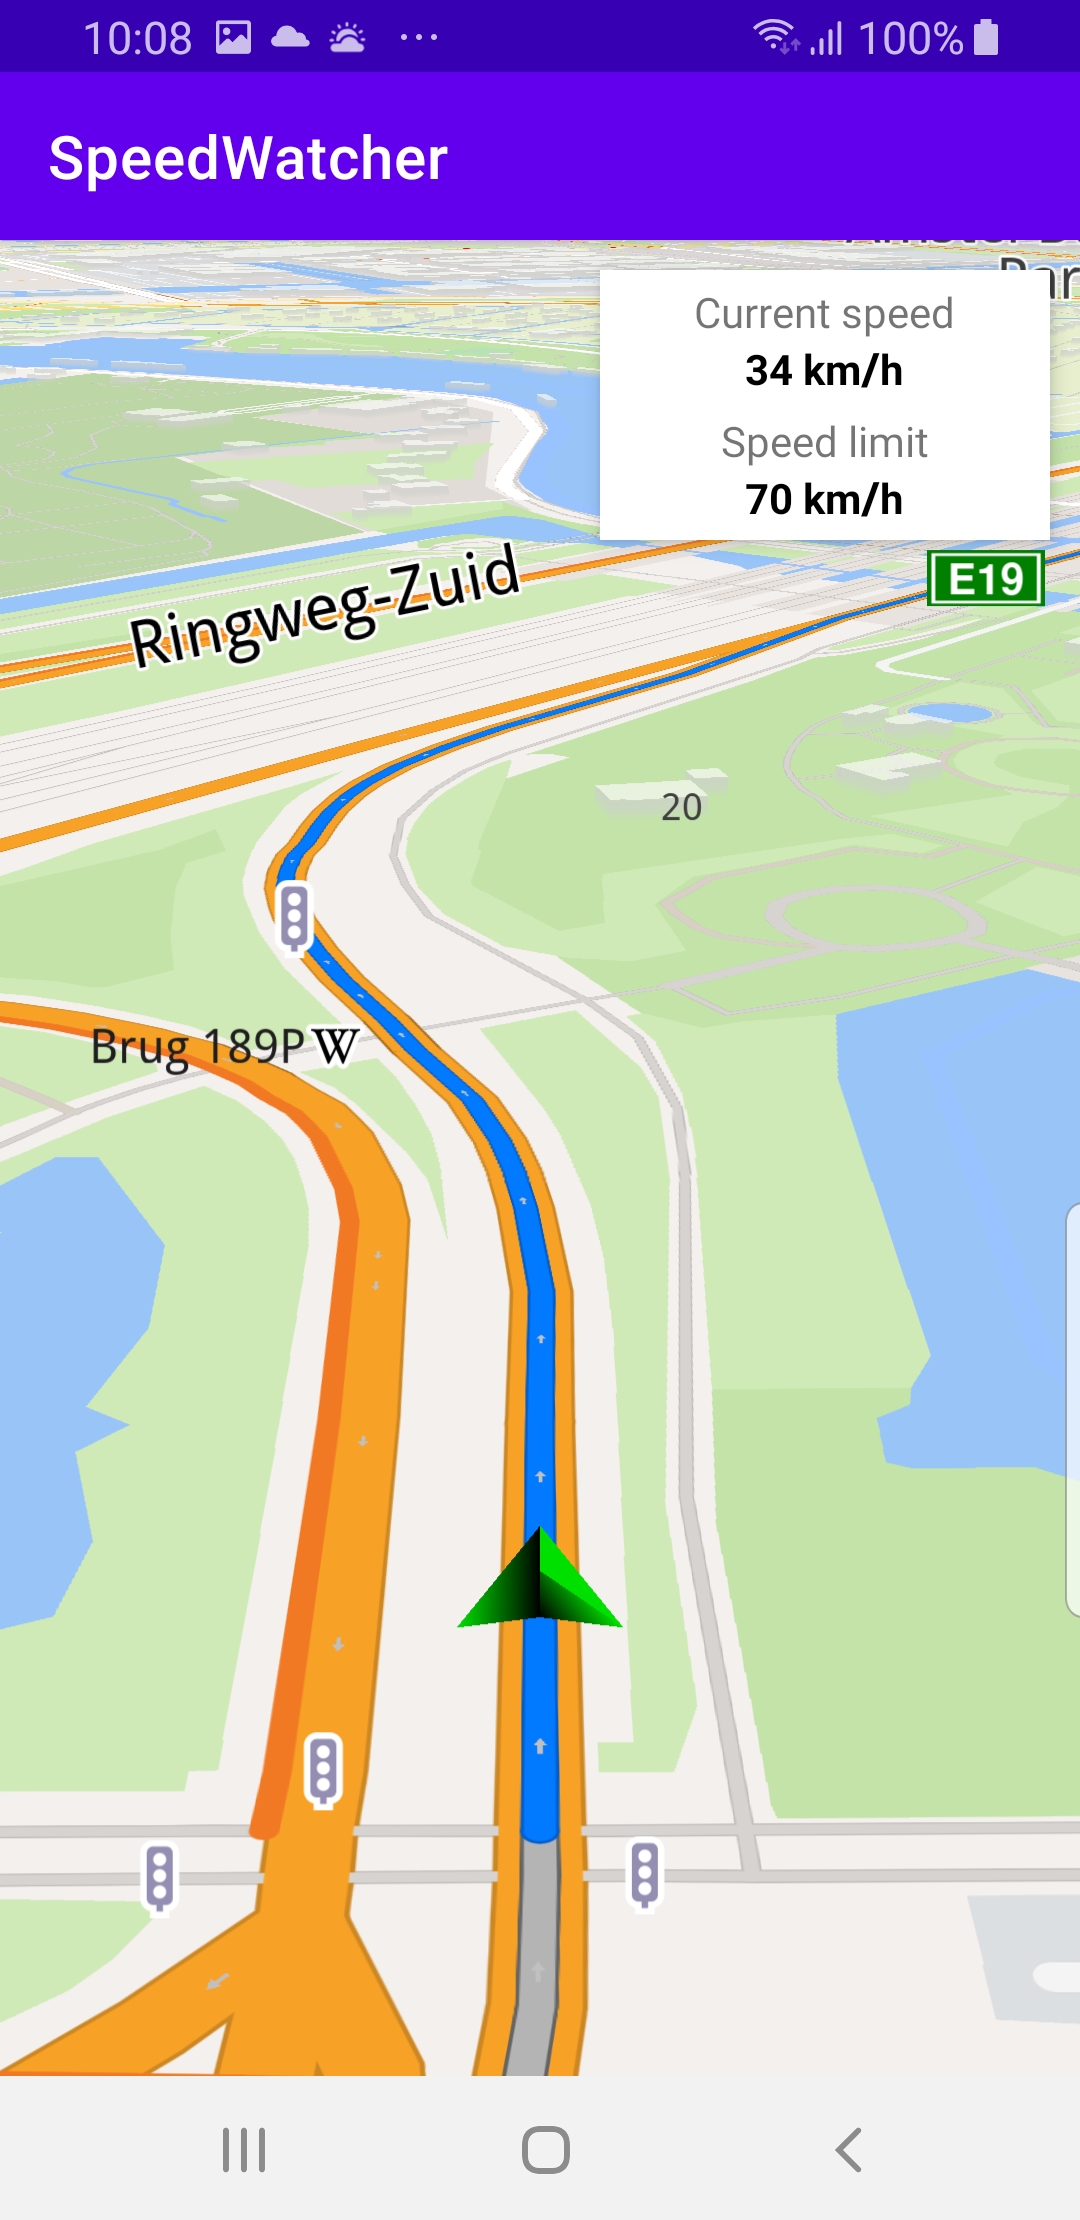 Speed watcher simulated navigation example Android screenshot